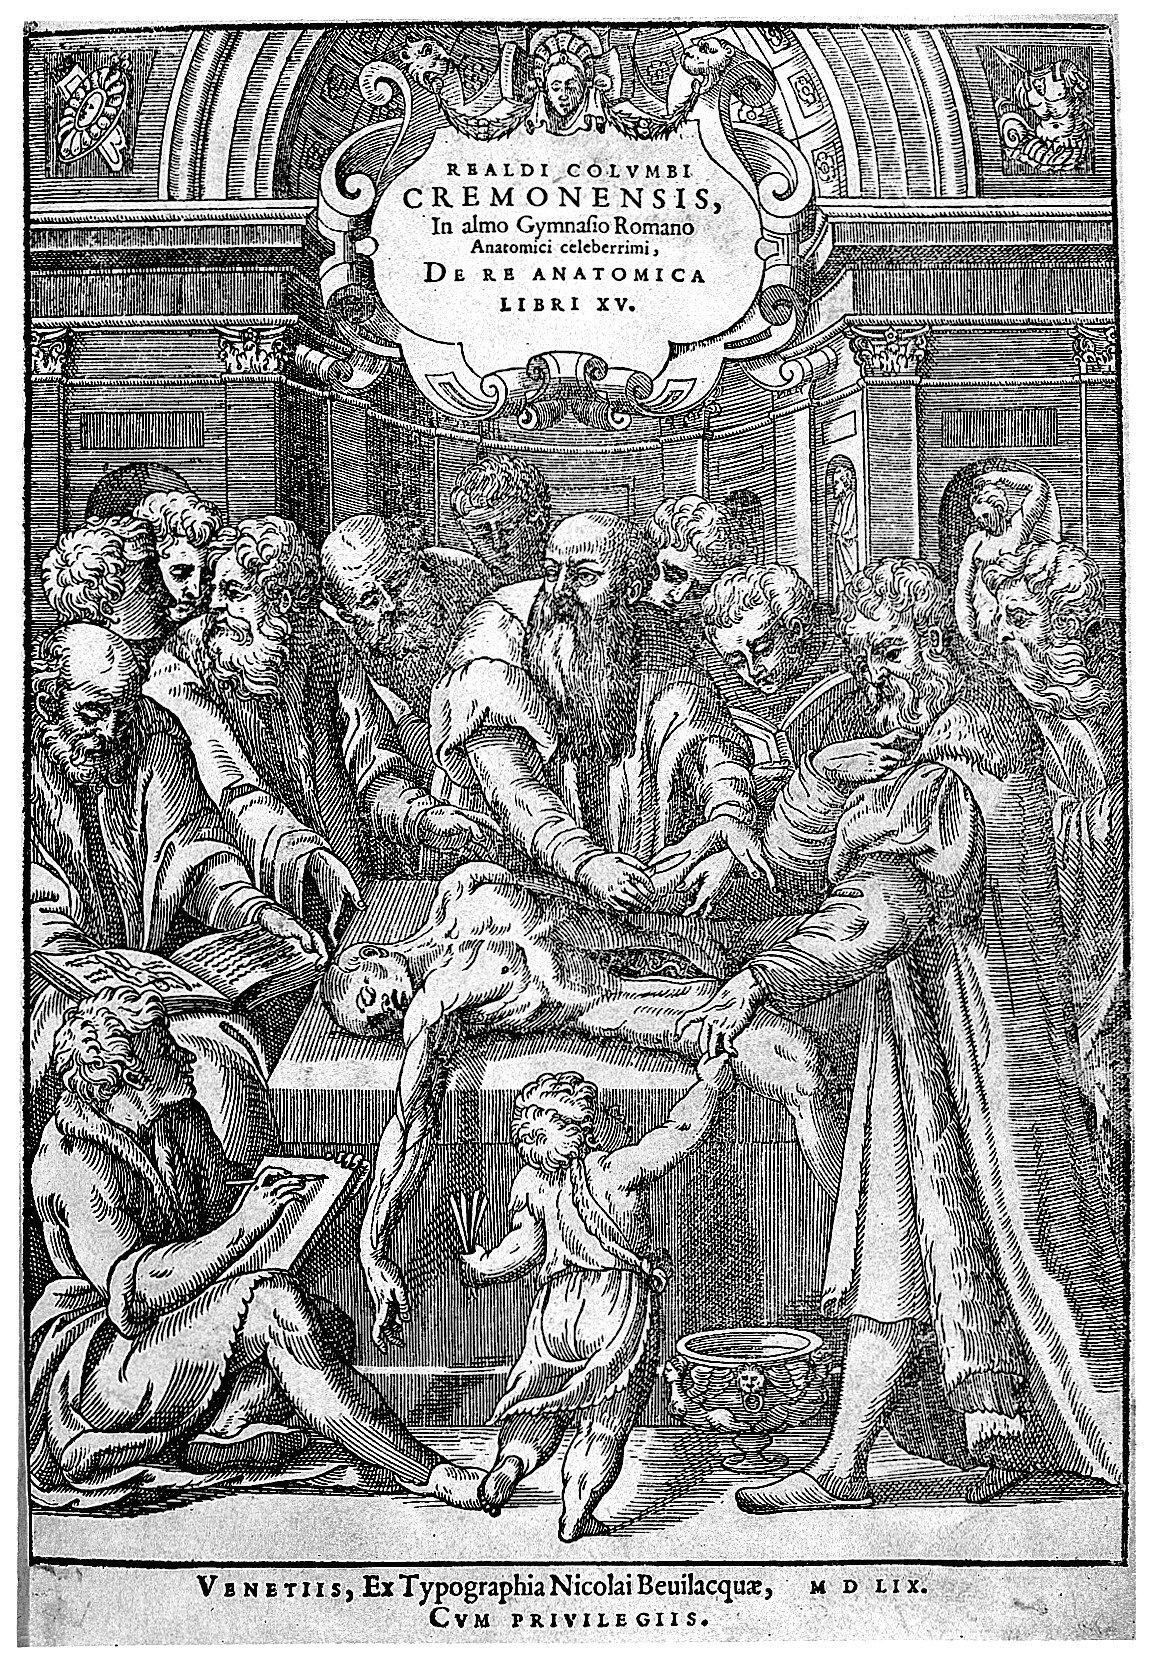 An ancient black and white book cover, showing a surgery.